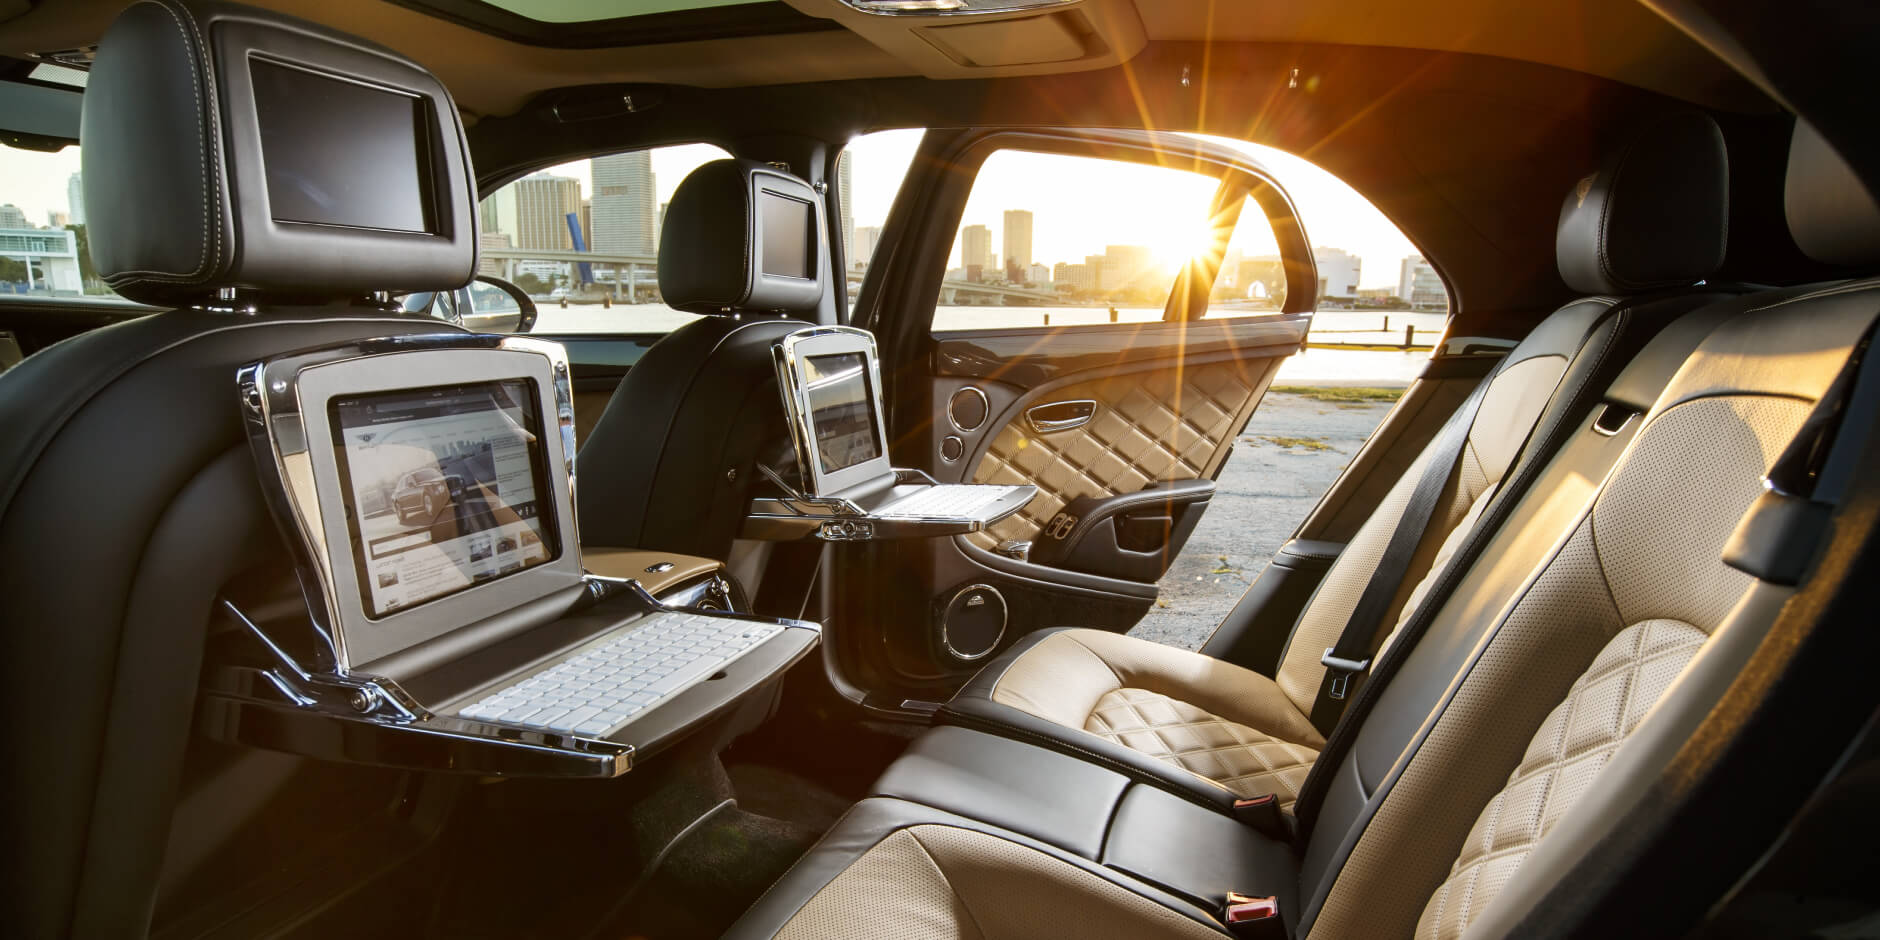 What Makes the Bentley Mulsanne the Ultimate Luxury Ride for Your Brighton & Hove Getaway?